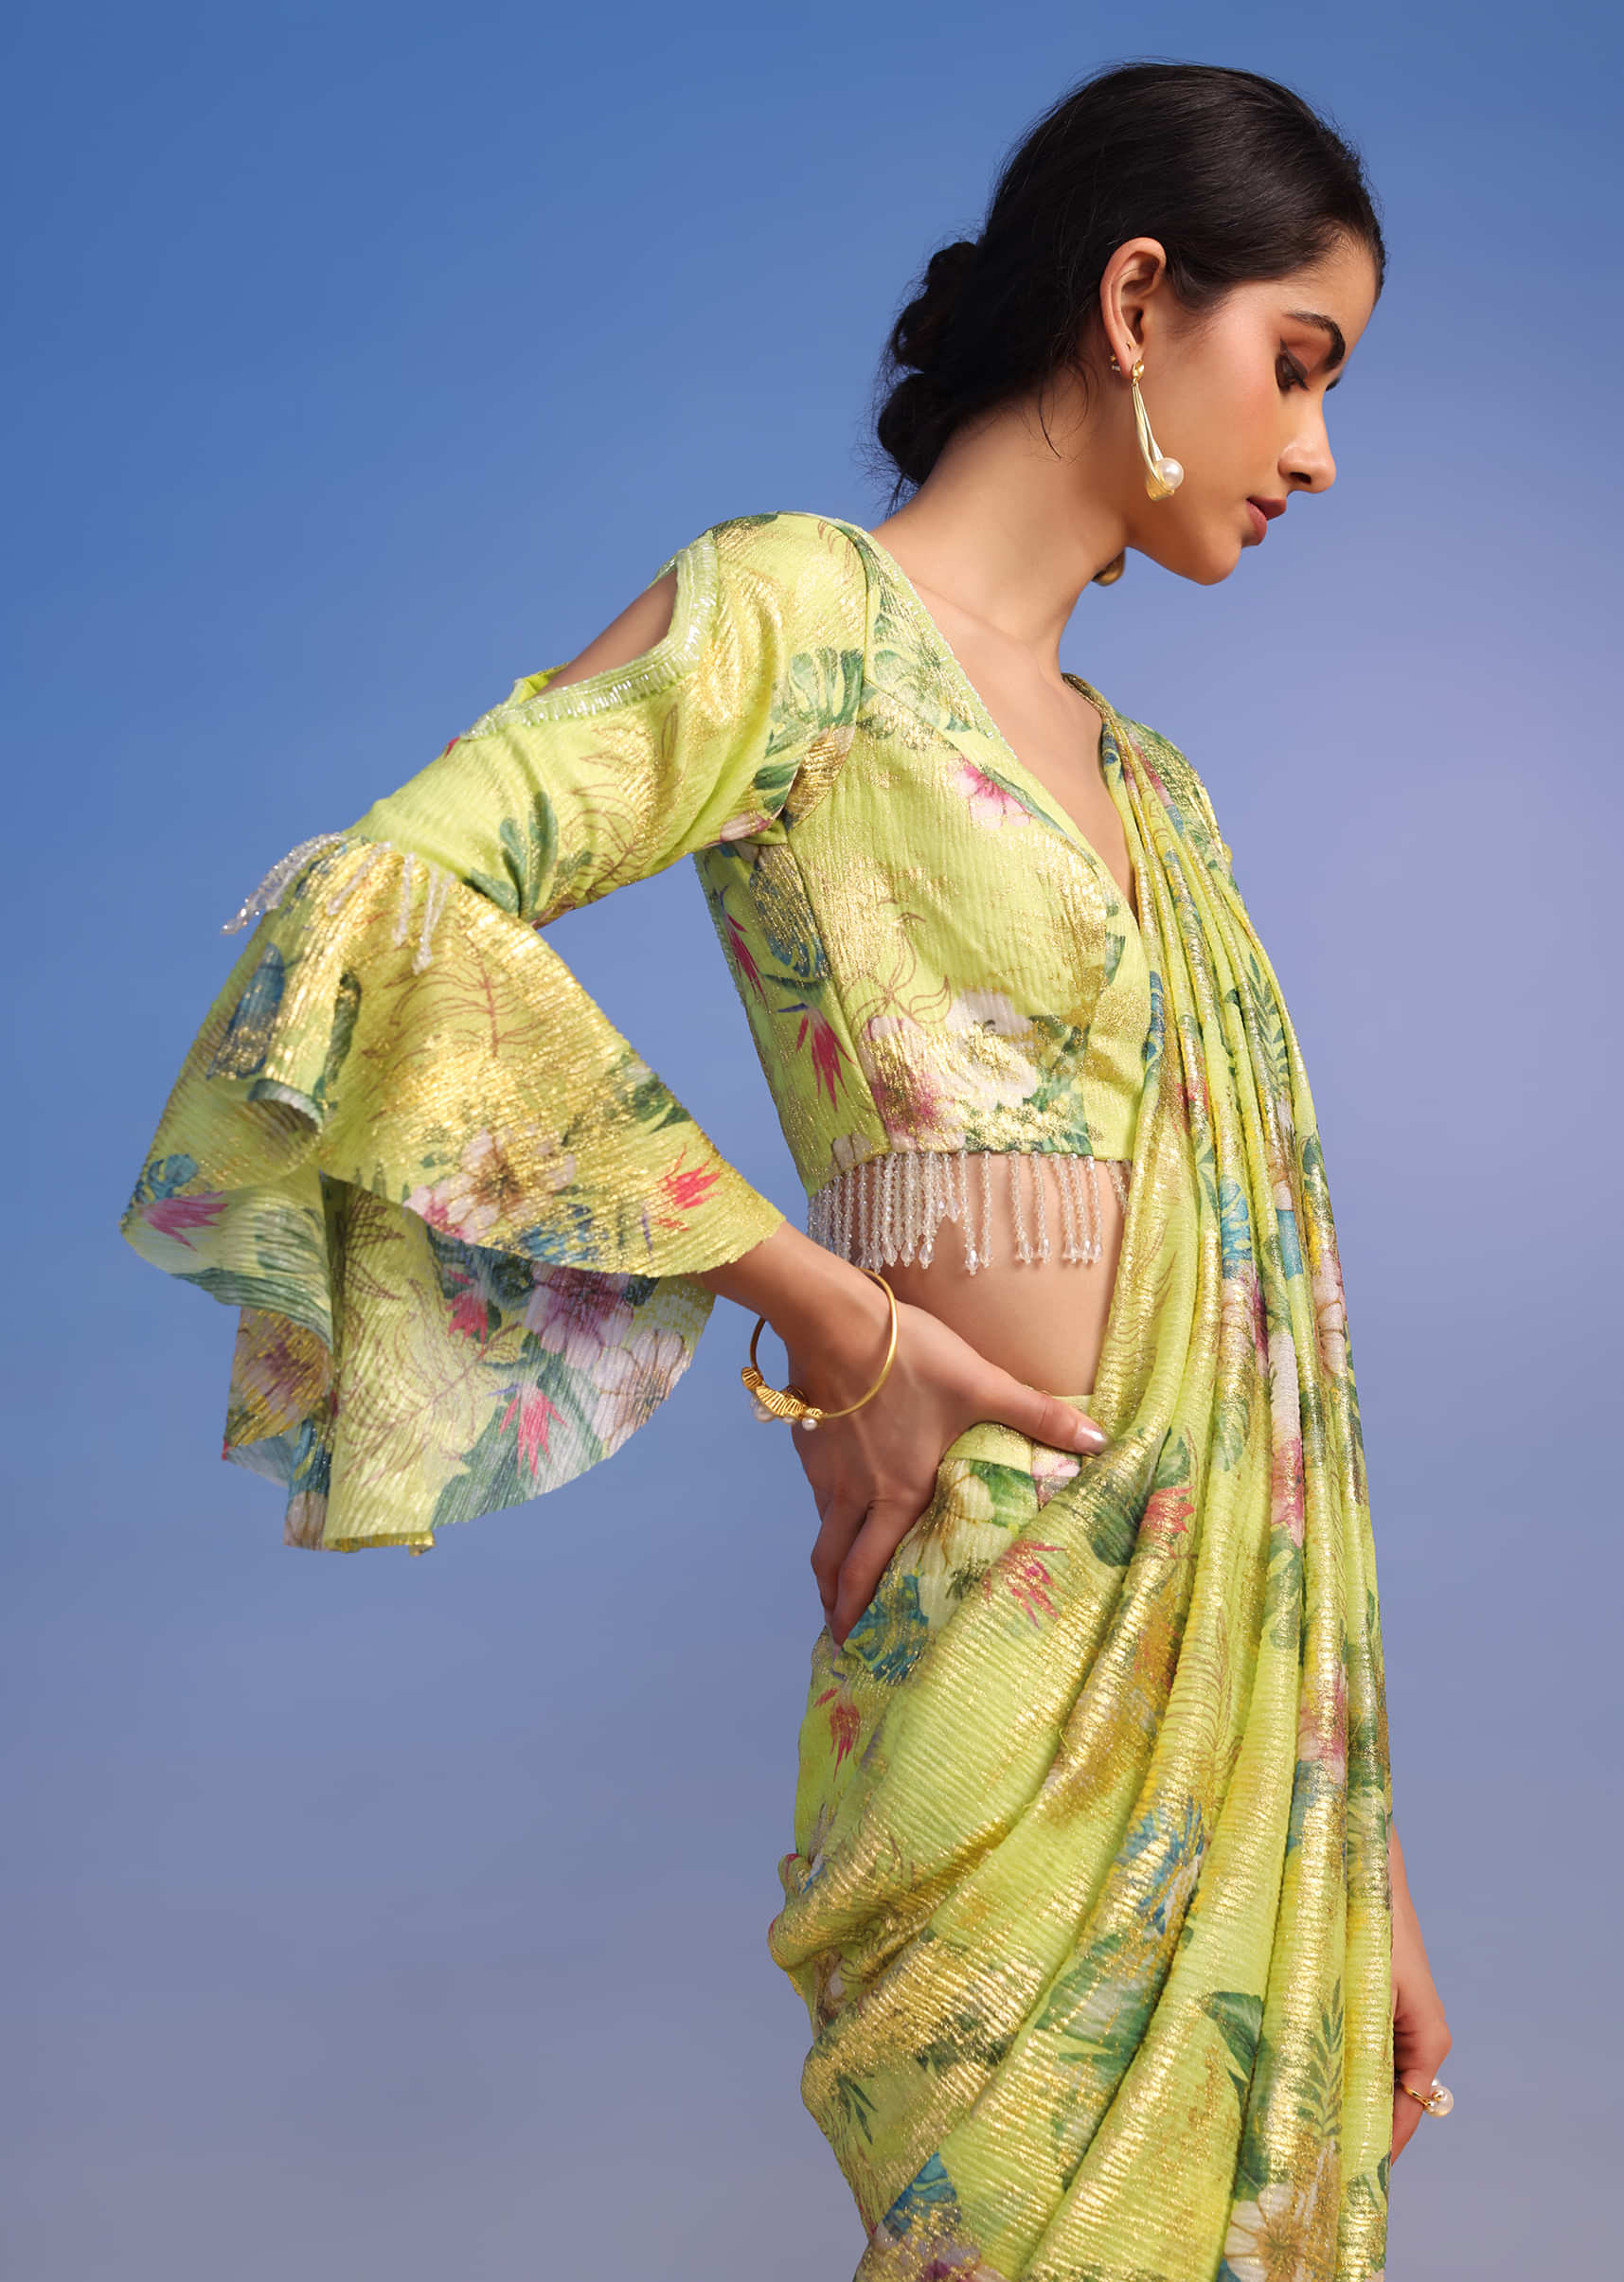 Lemon Green Ready-To-Wear Saree In Crush With Floral Print And Stone Tassel Border